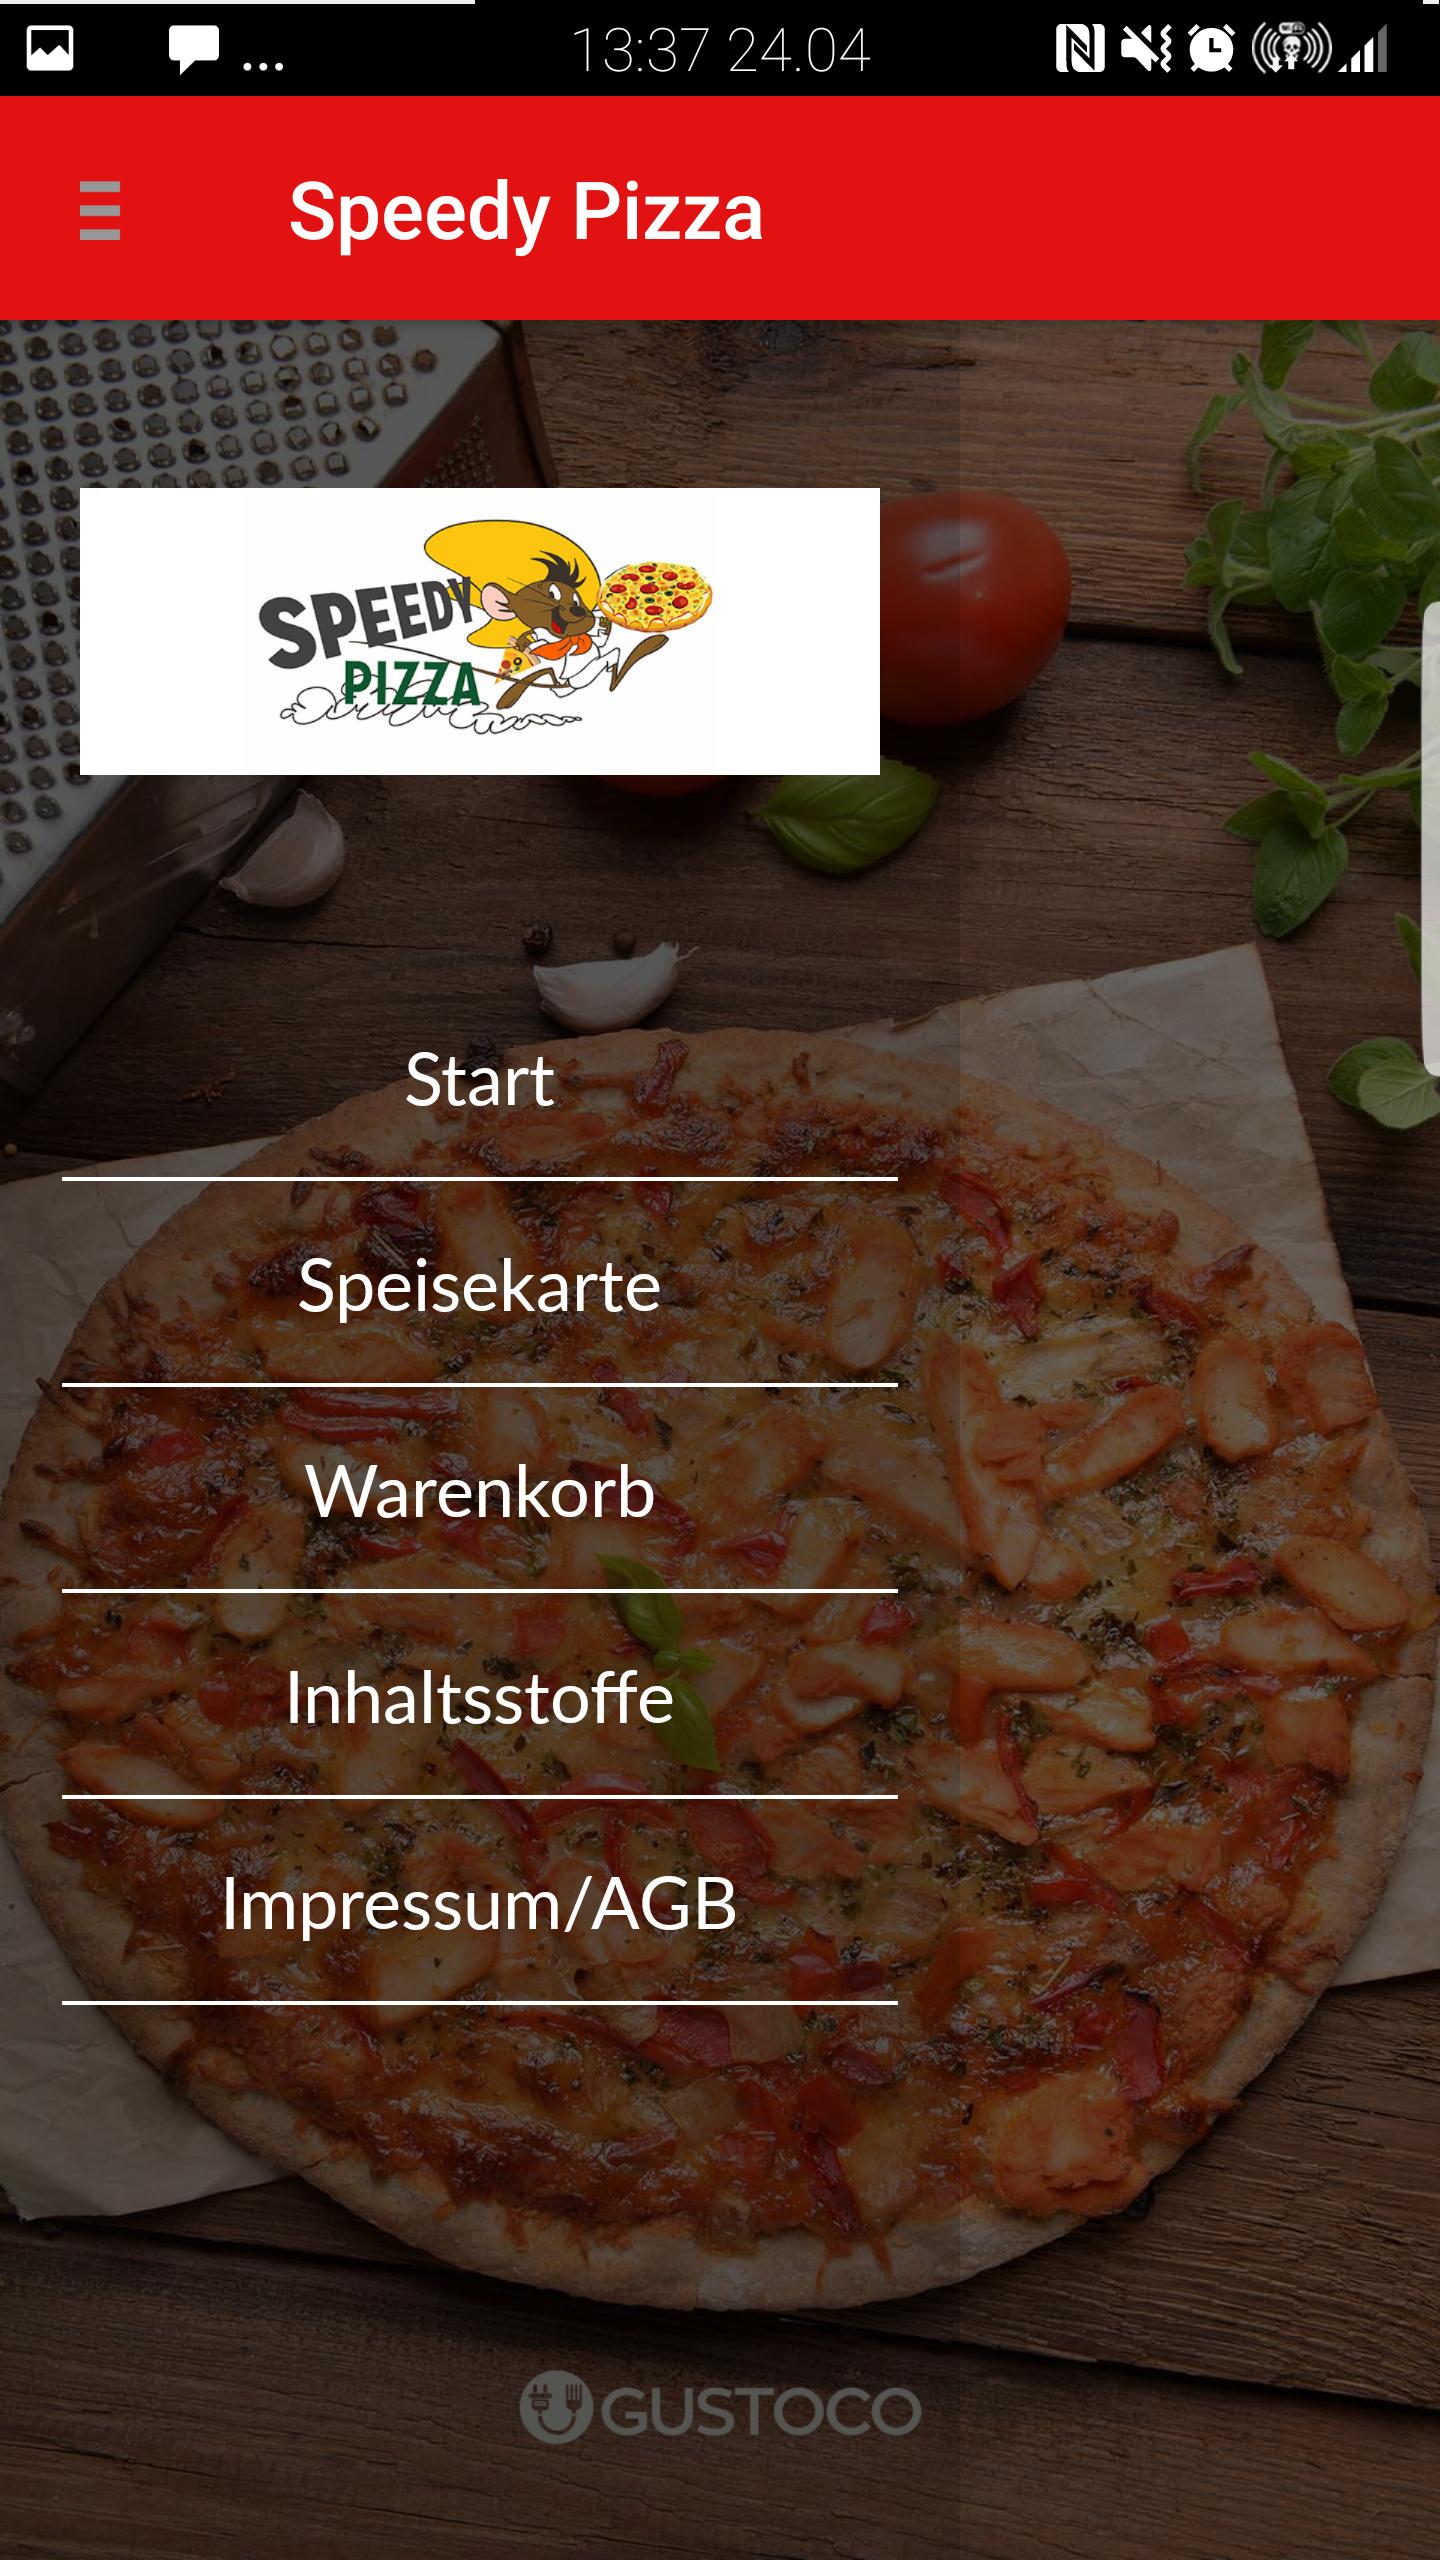 Speedy Pizza for Android - APK Download